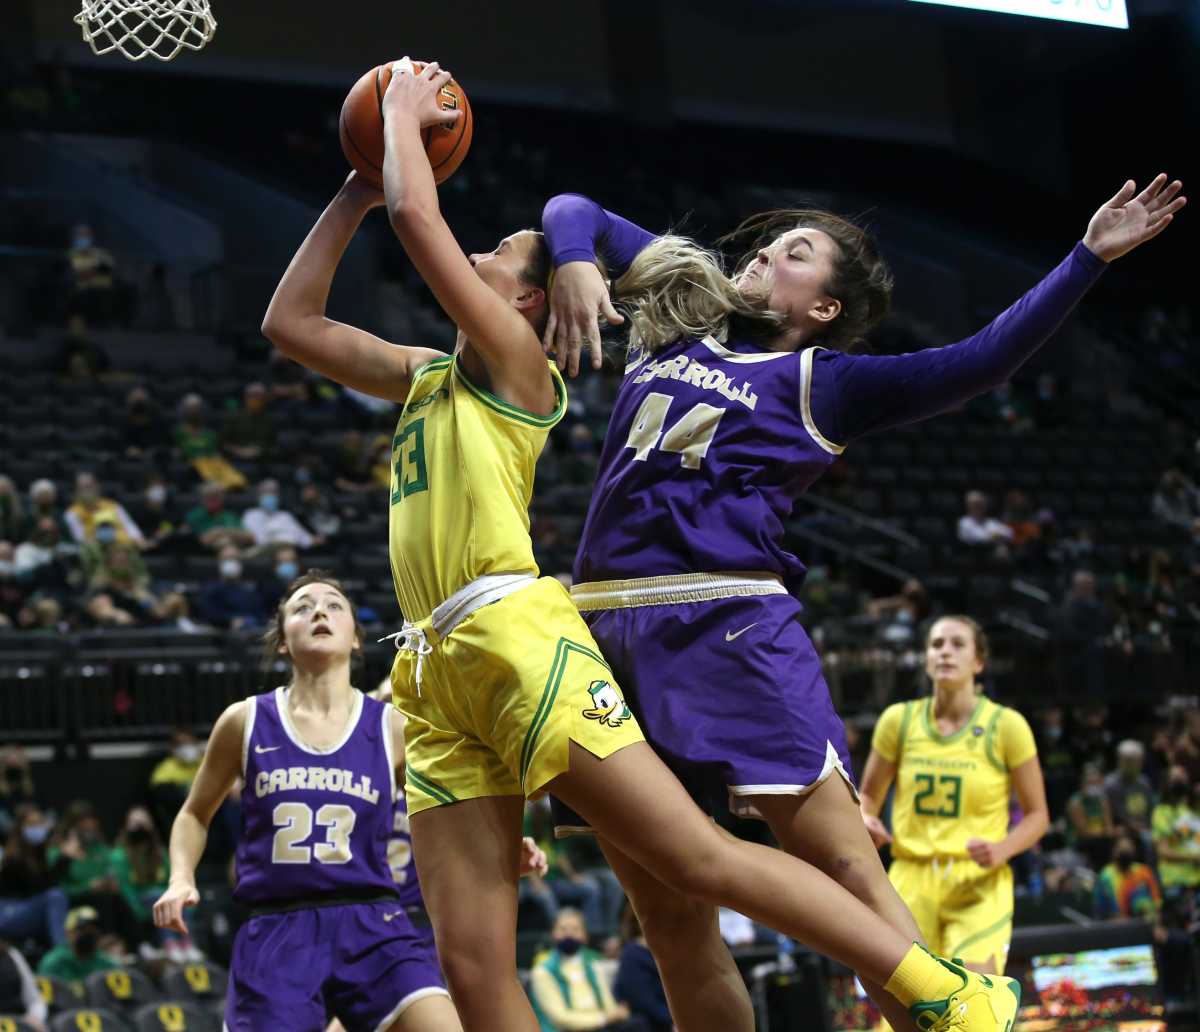 Sydney Parrish is fouled by Carroll College's Maddie Geritz as she goes up for a shot during the second half in Eugene Jan. 2, 2022.